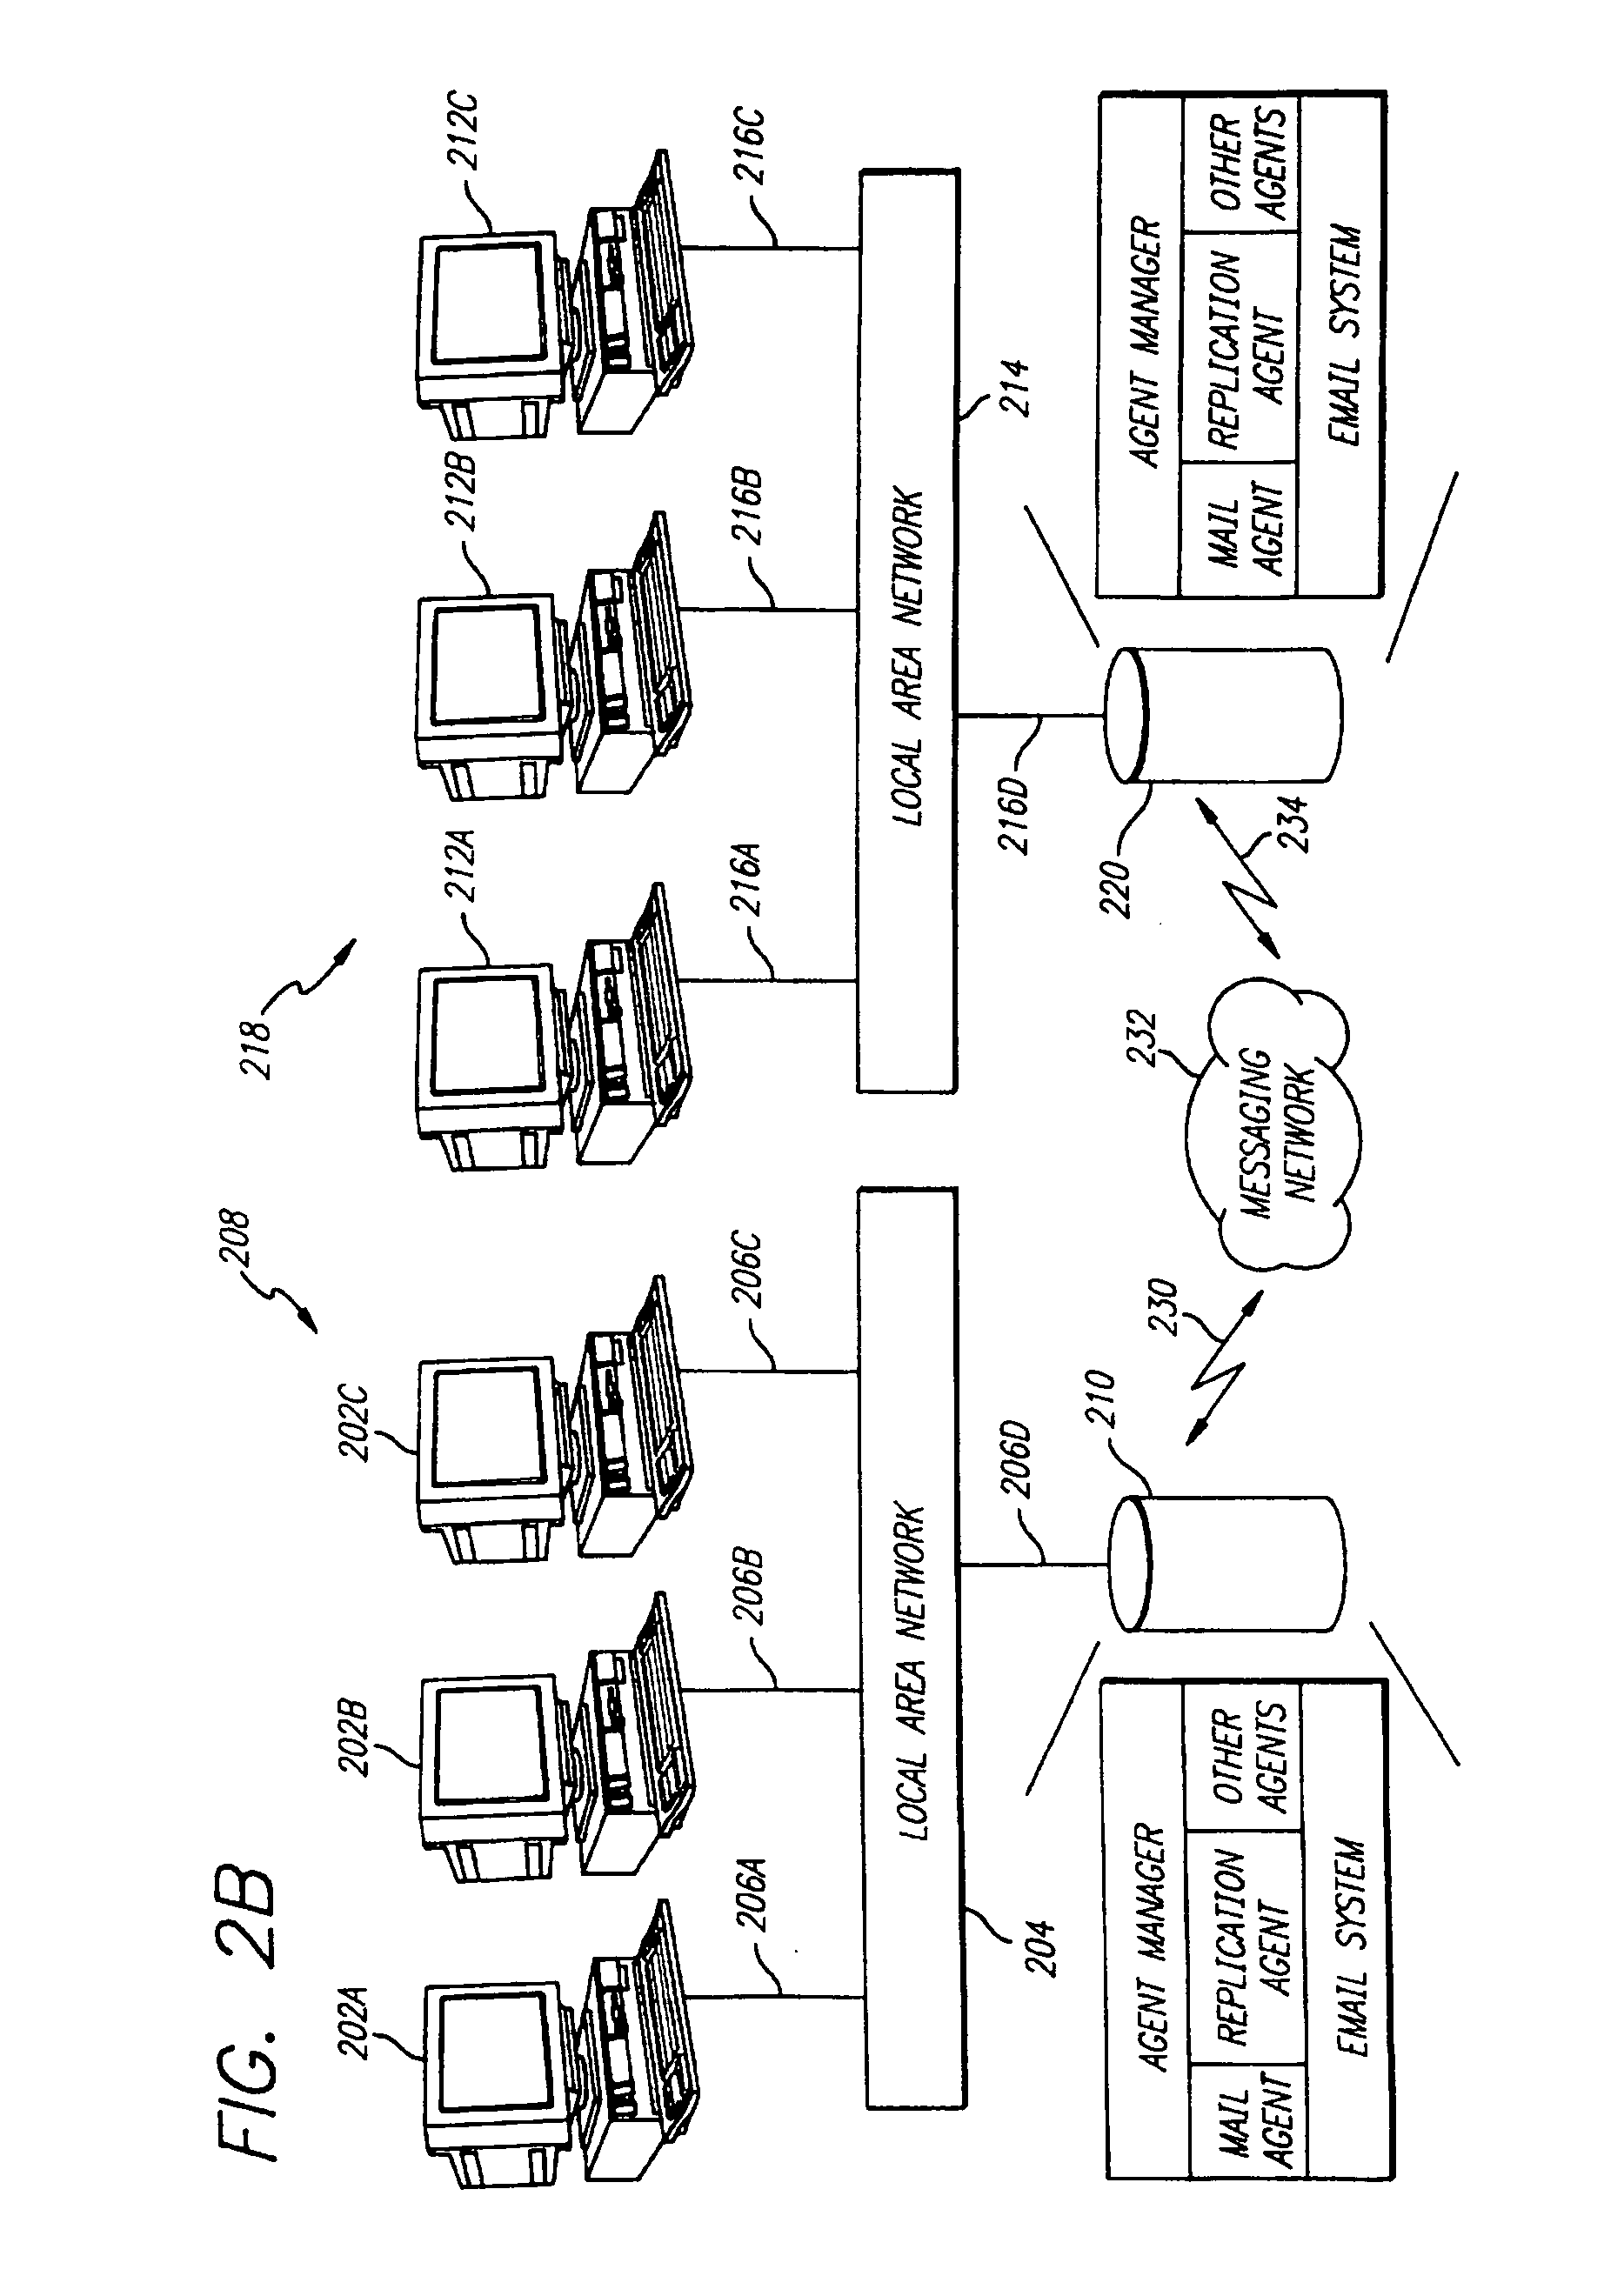 Method and apparatus for replicating information